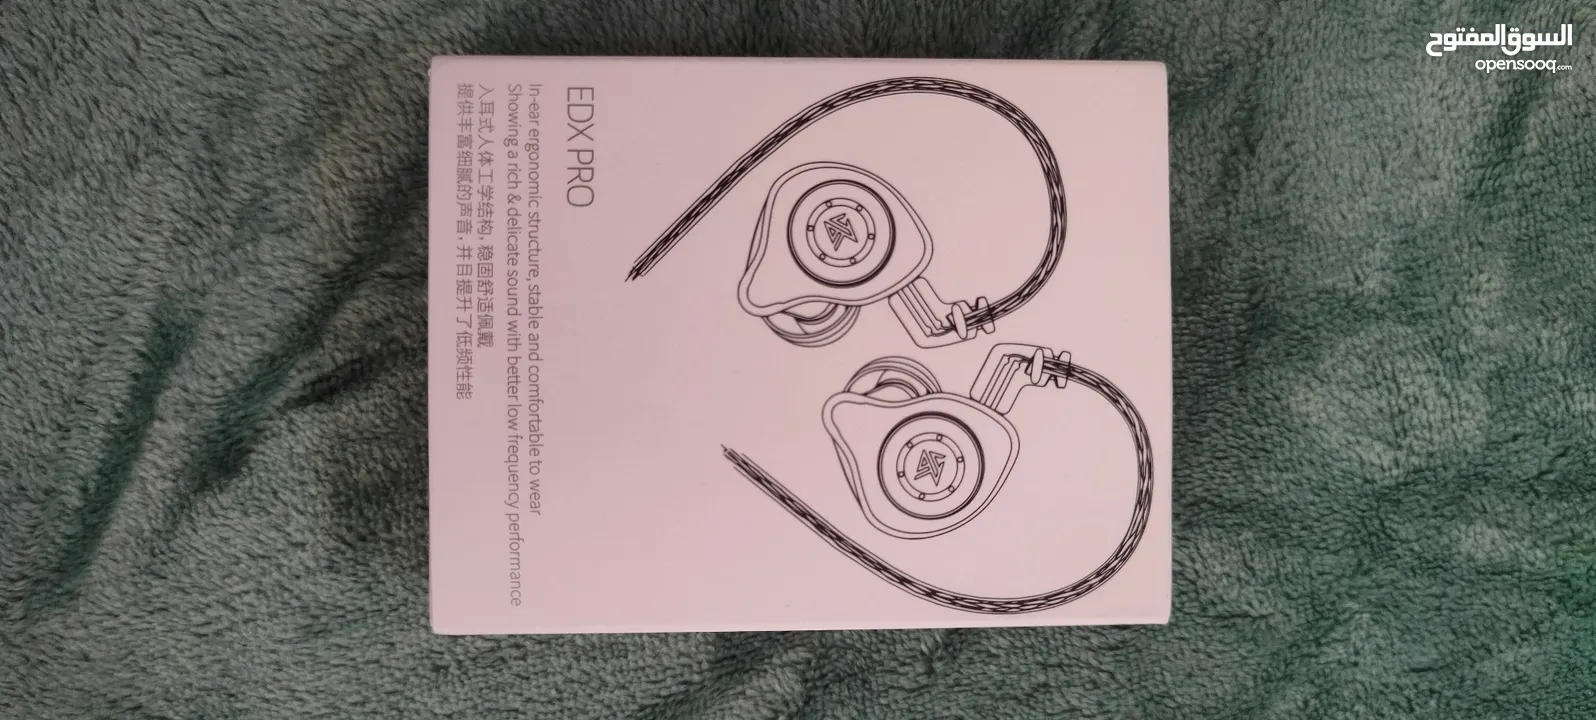 Brand New KZ- EDX PRO IEMS Pro with mic sound for gaming and music Headphone / earbuds